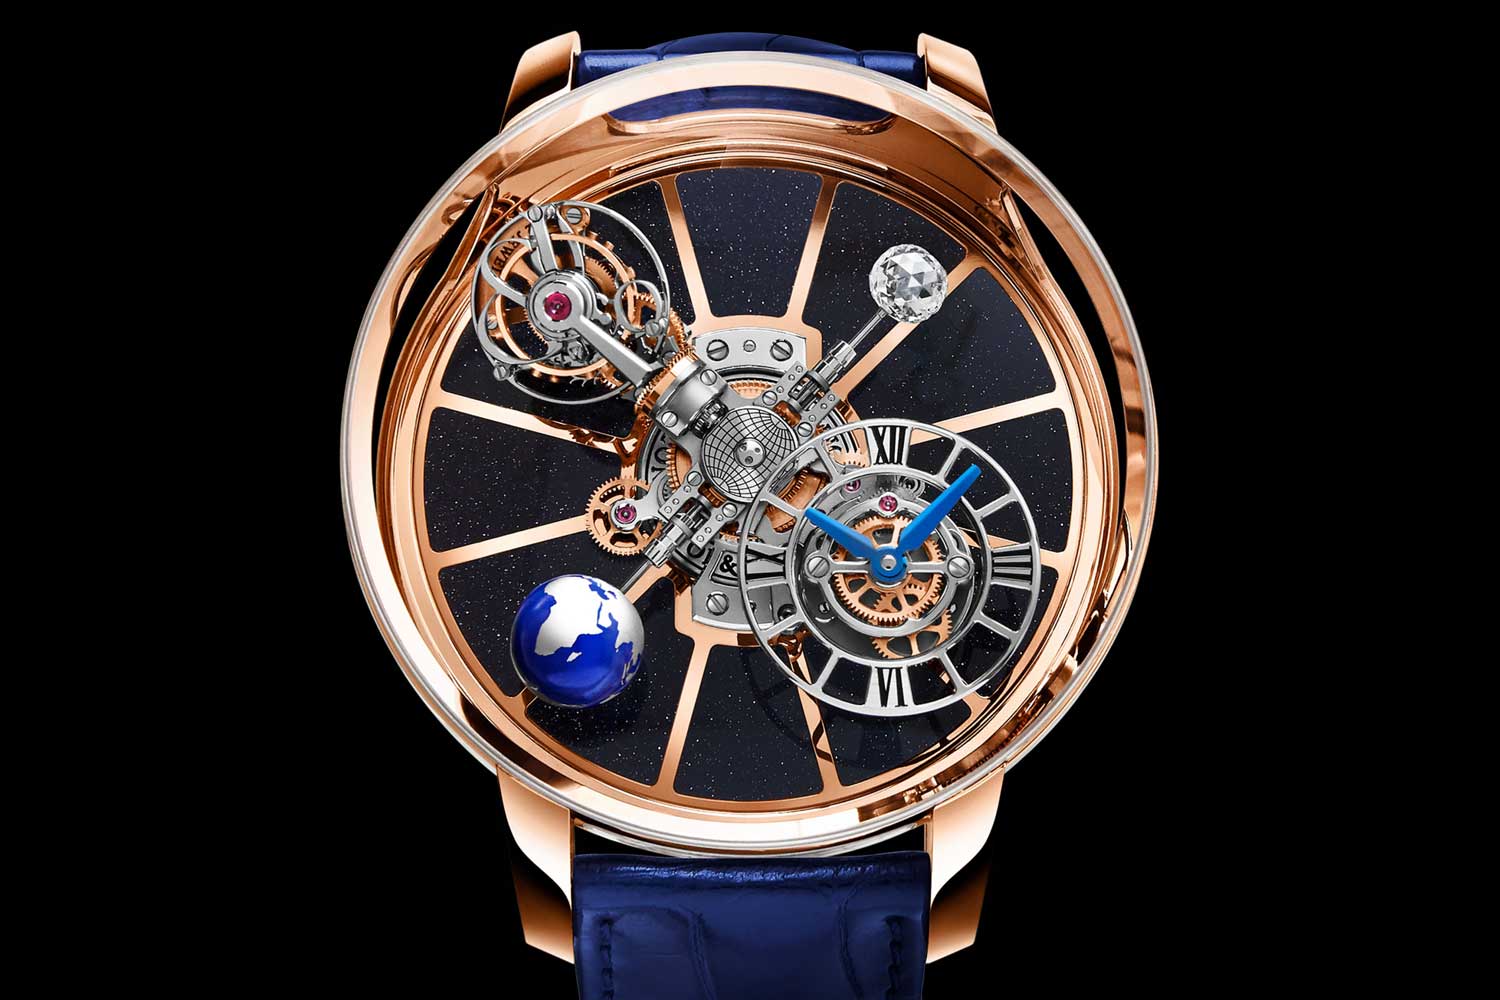 The awe-inspiring Astronomia with its distinctive four-arm carriage that completes a full clockwise revolution every 20 minutes